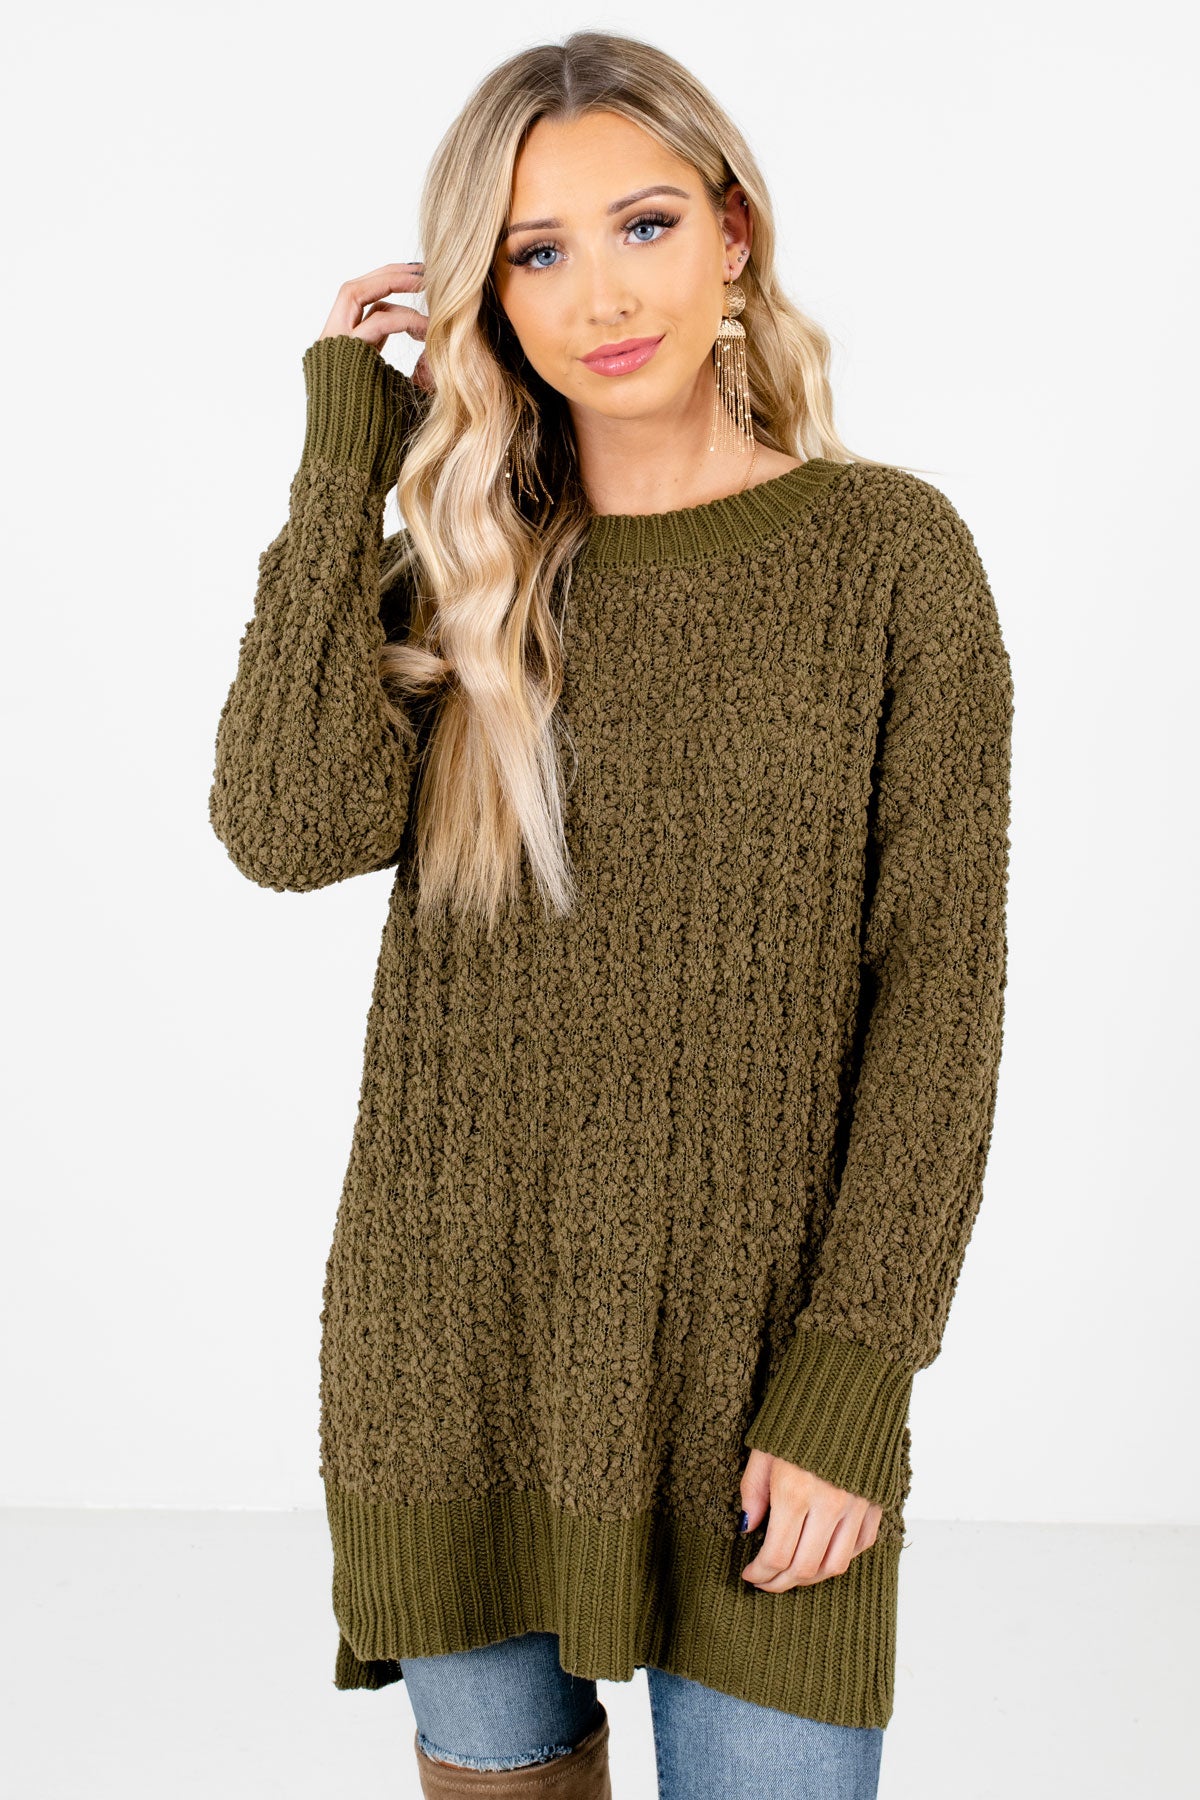 Olive Green High-Quality Popcorn Knit Material Boutique Sweaters for Women